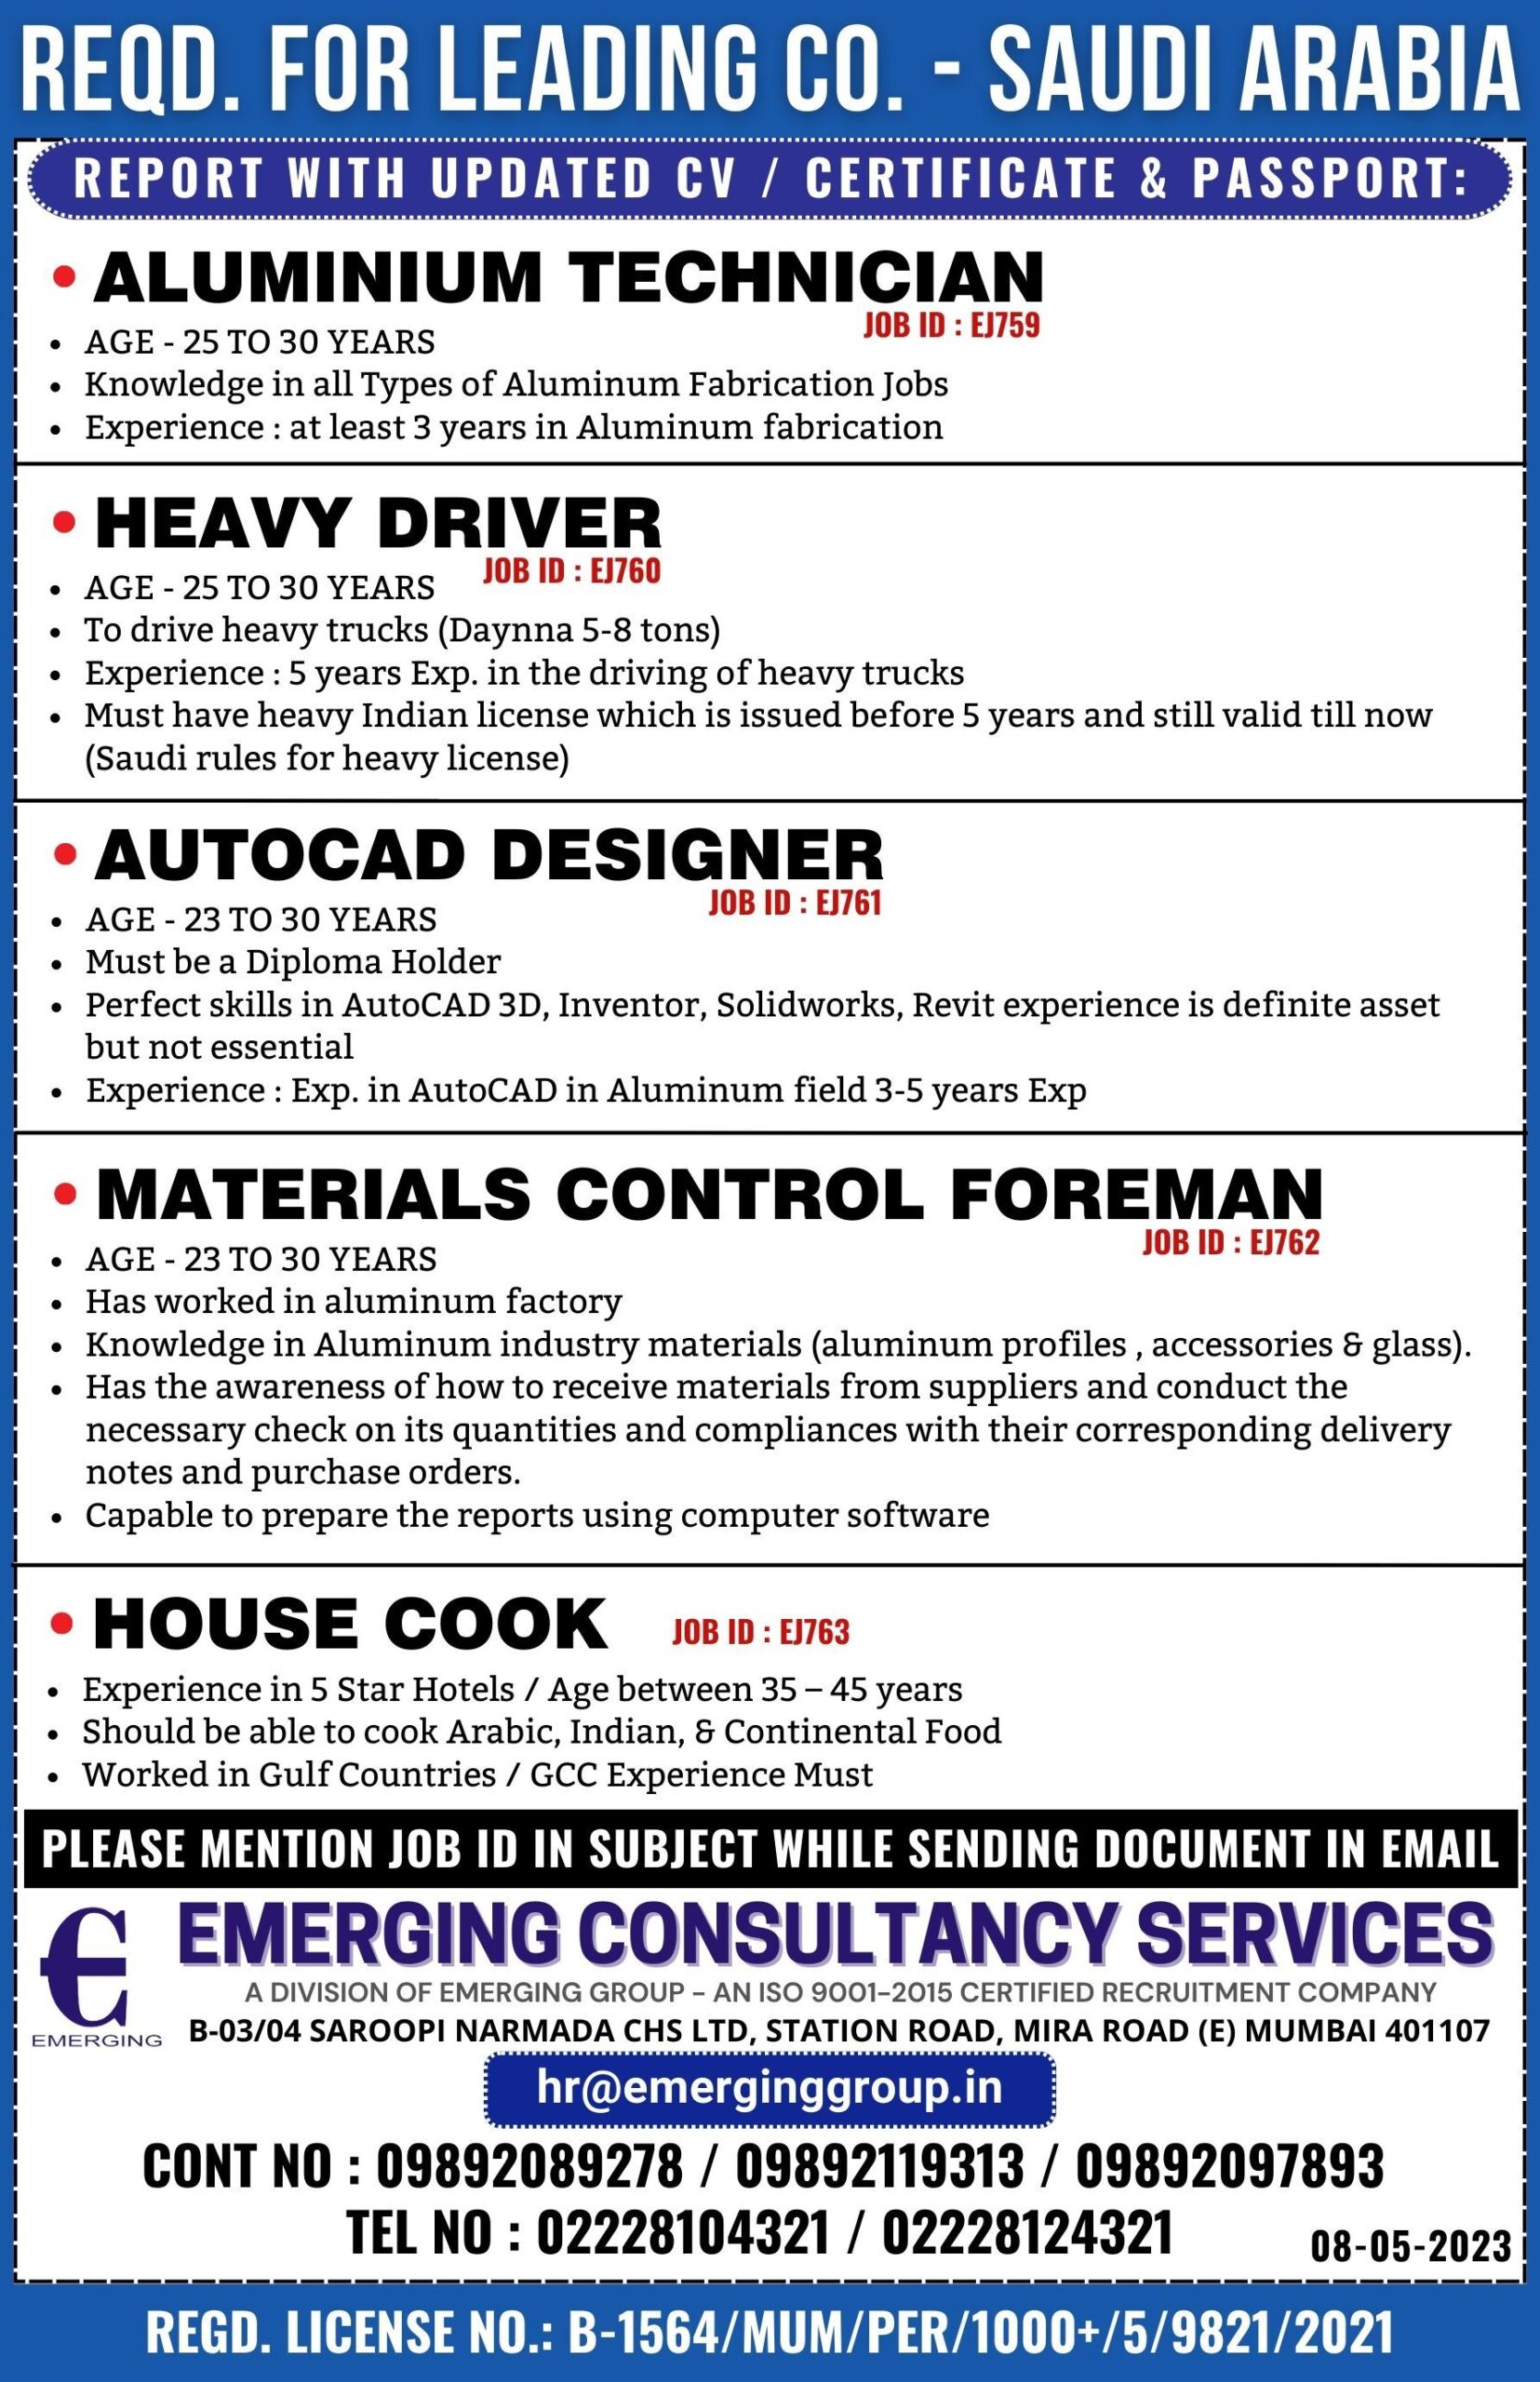 EMERGING CONSULTANCY SERVICES-499b4480